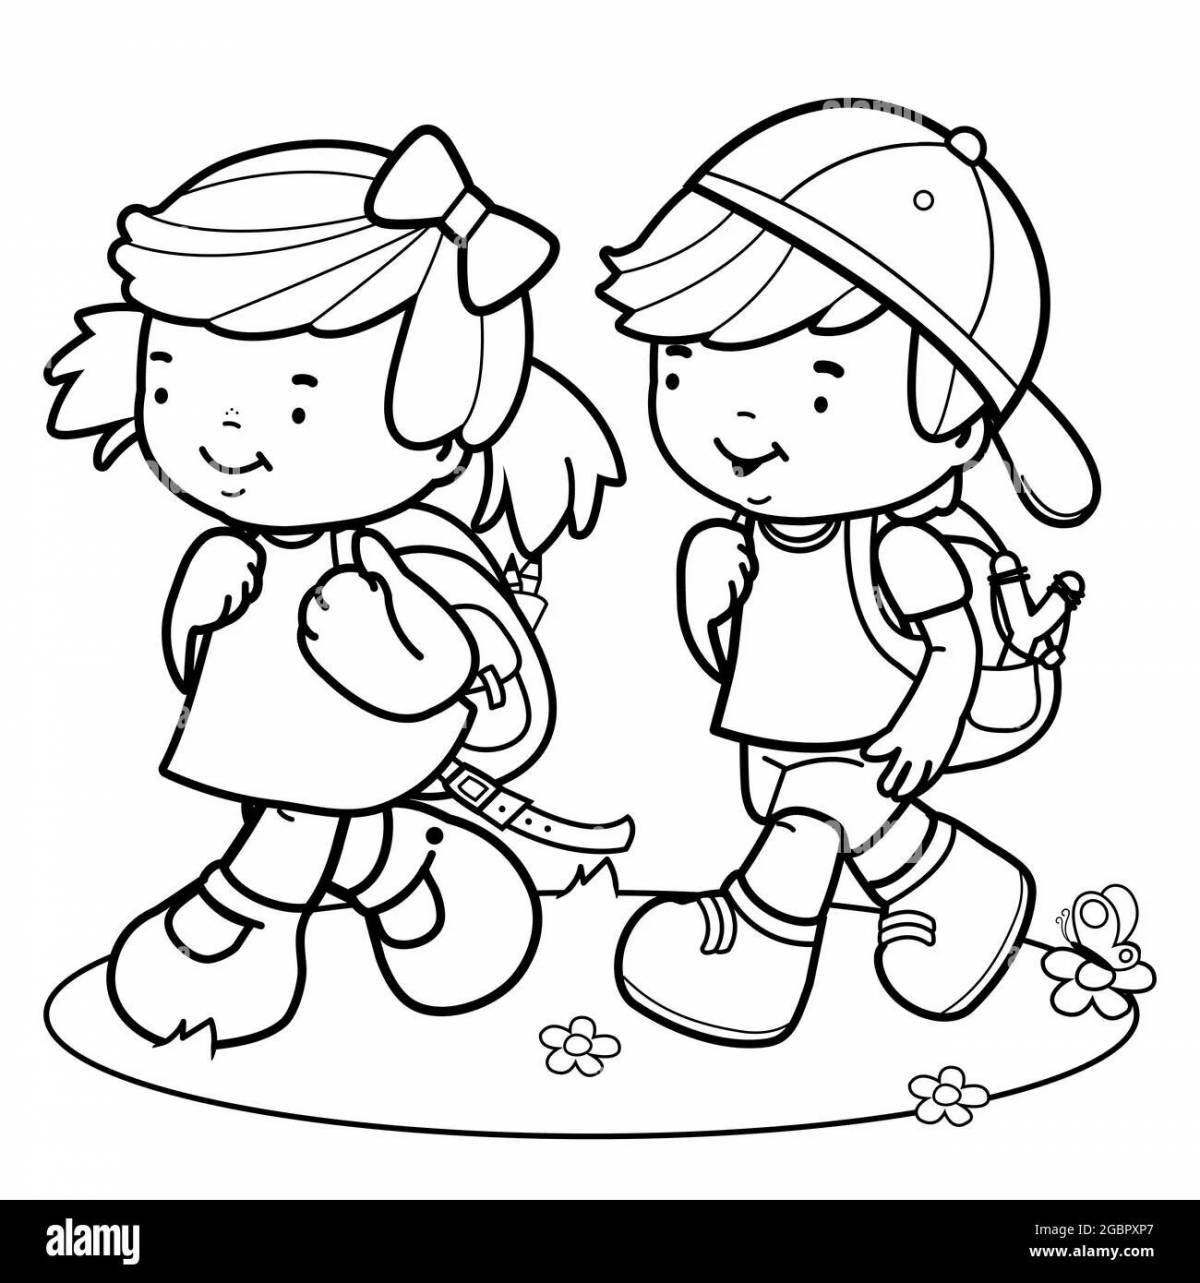 Coloring book for boys and girls